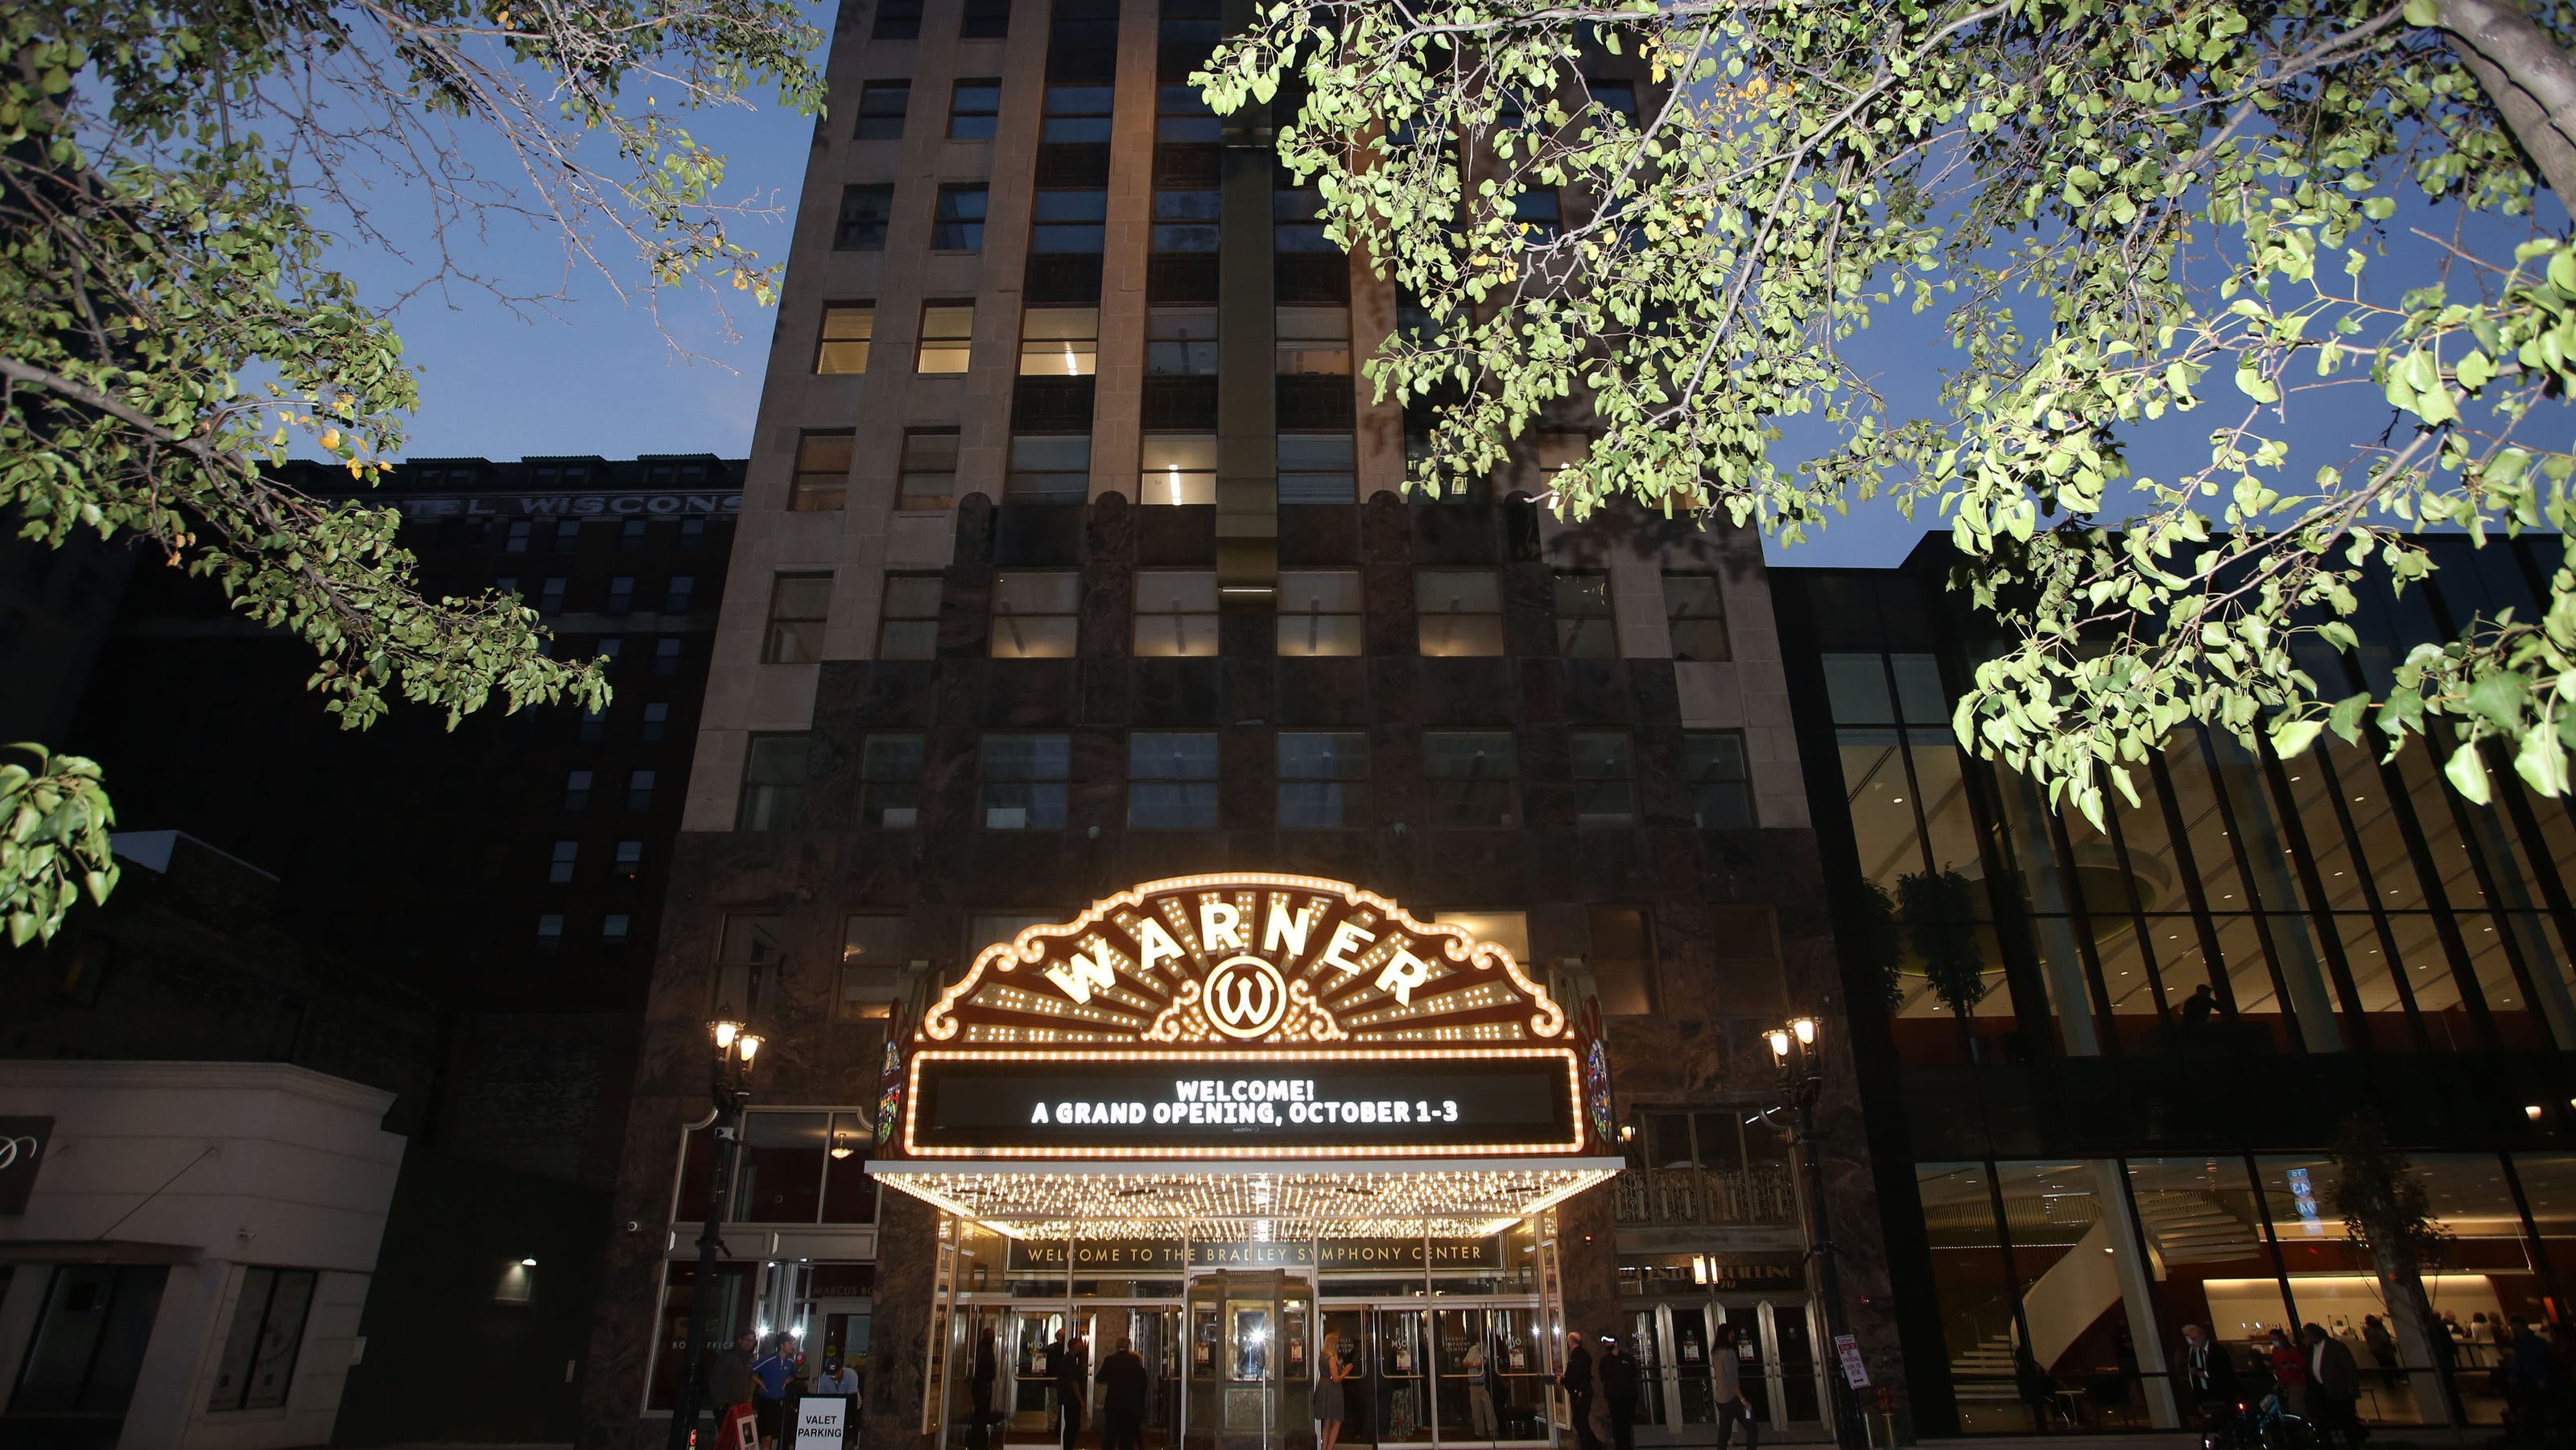 Warner Grand Theater is the new home for the Milwaukee Symphony